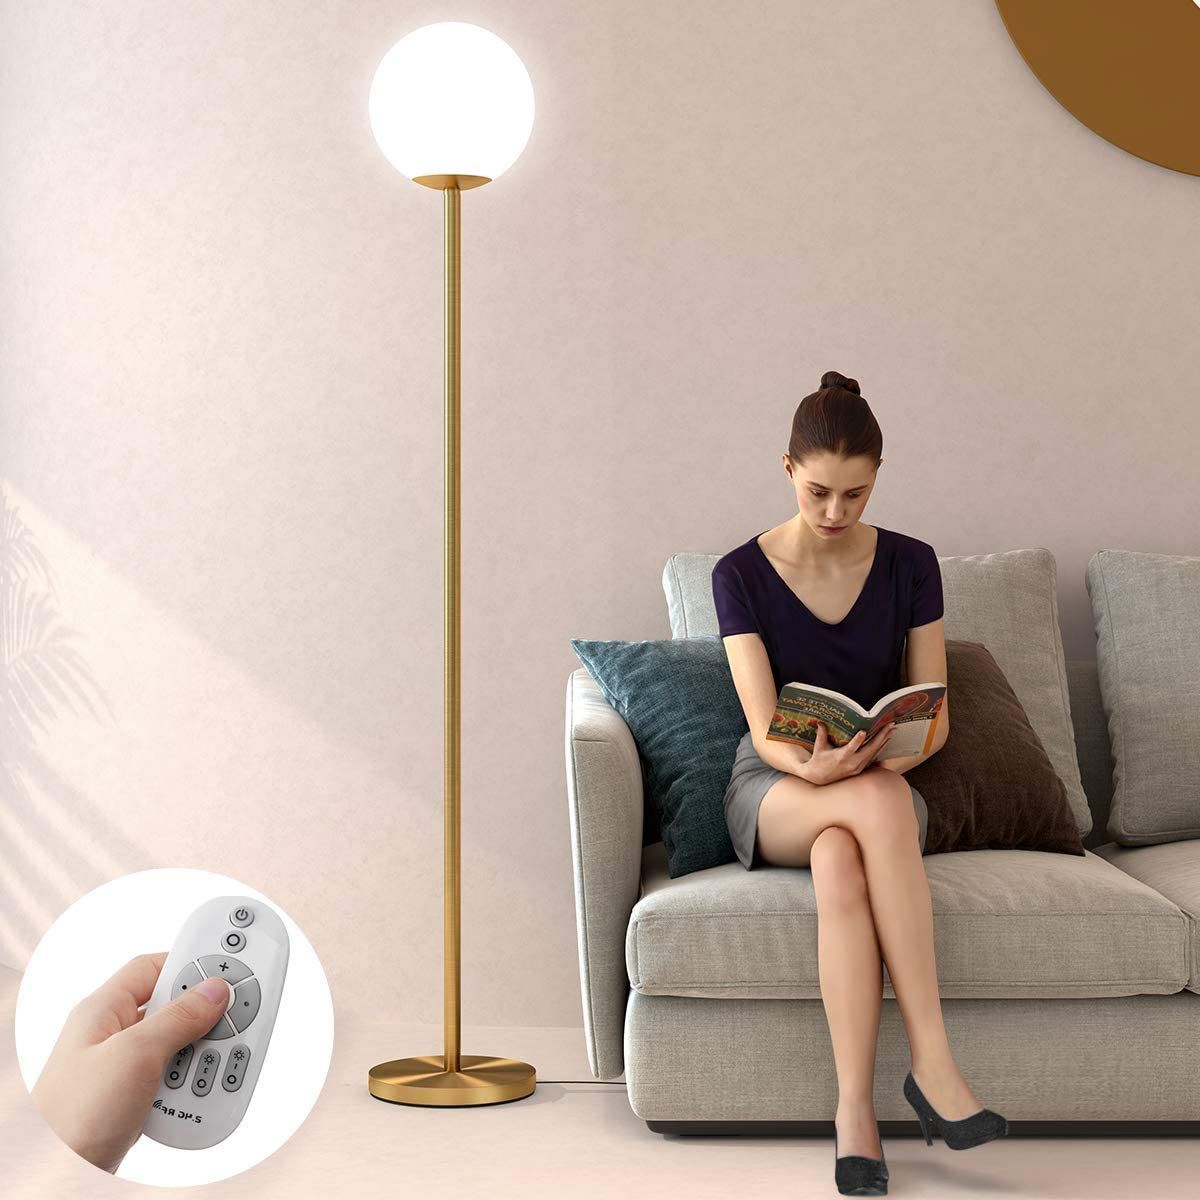 Led Floor Lamp Remote Control Frosted Glass Globe Floor Lamp Mid Century  Modern Standing Lamp For Living Rooms Bedrooms Offices Tall Pole Light With  Led Bulb Included Antique Brass – Walmart For Frosted Glass Floor Lamps (View 11 of 20)